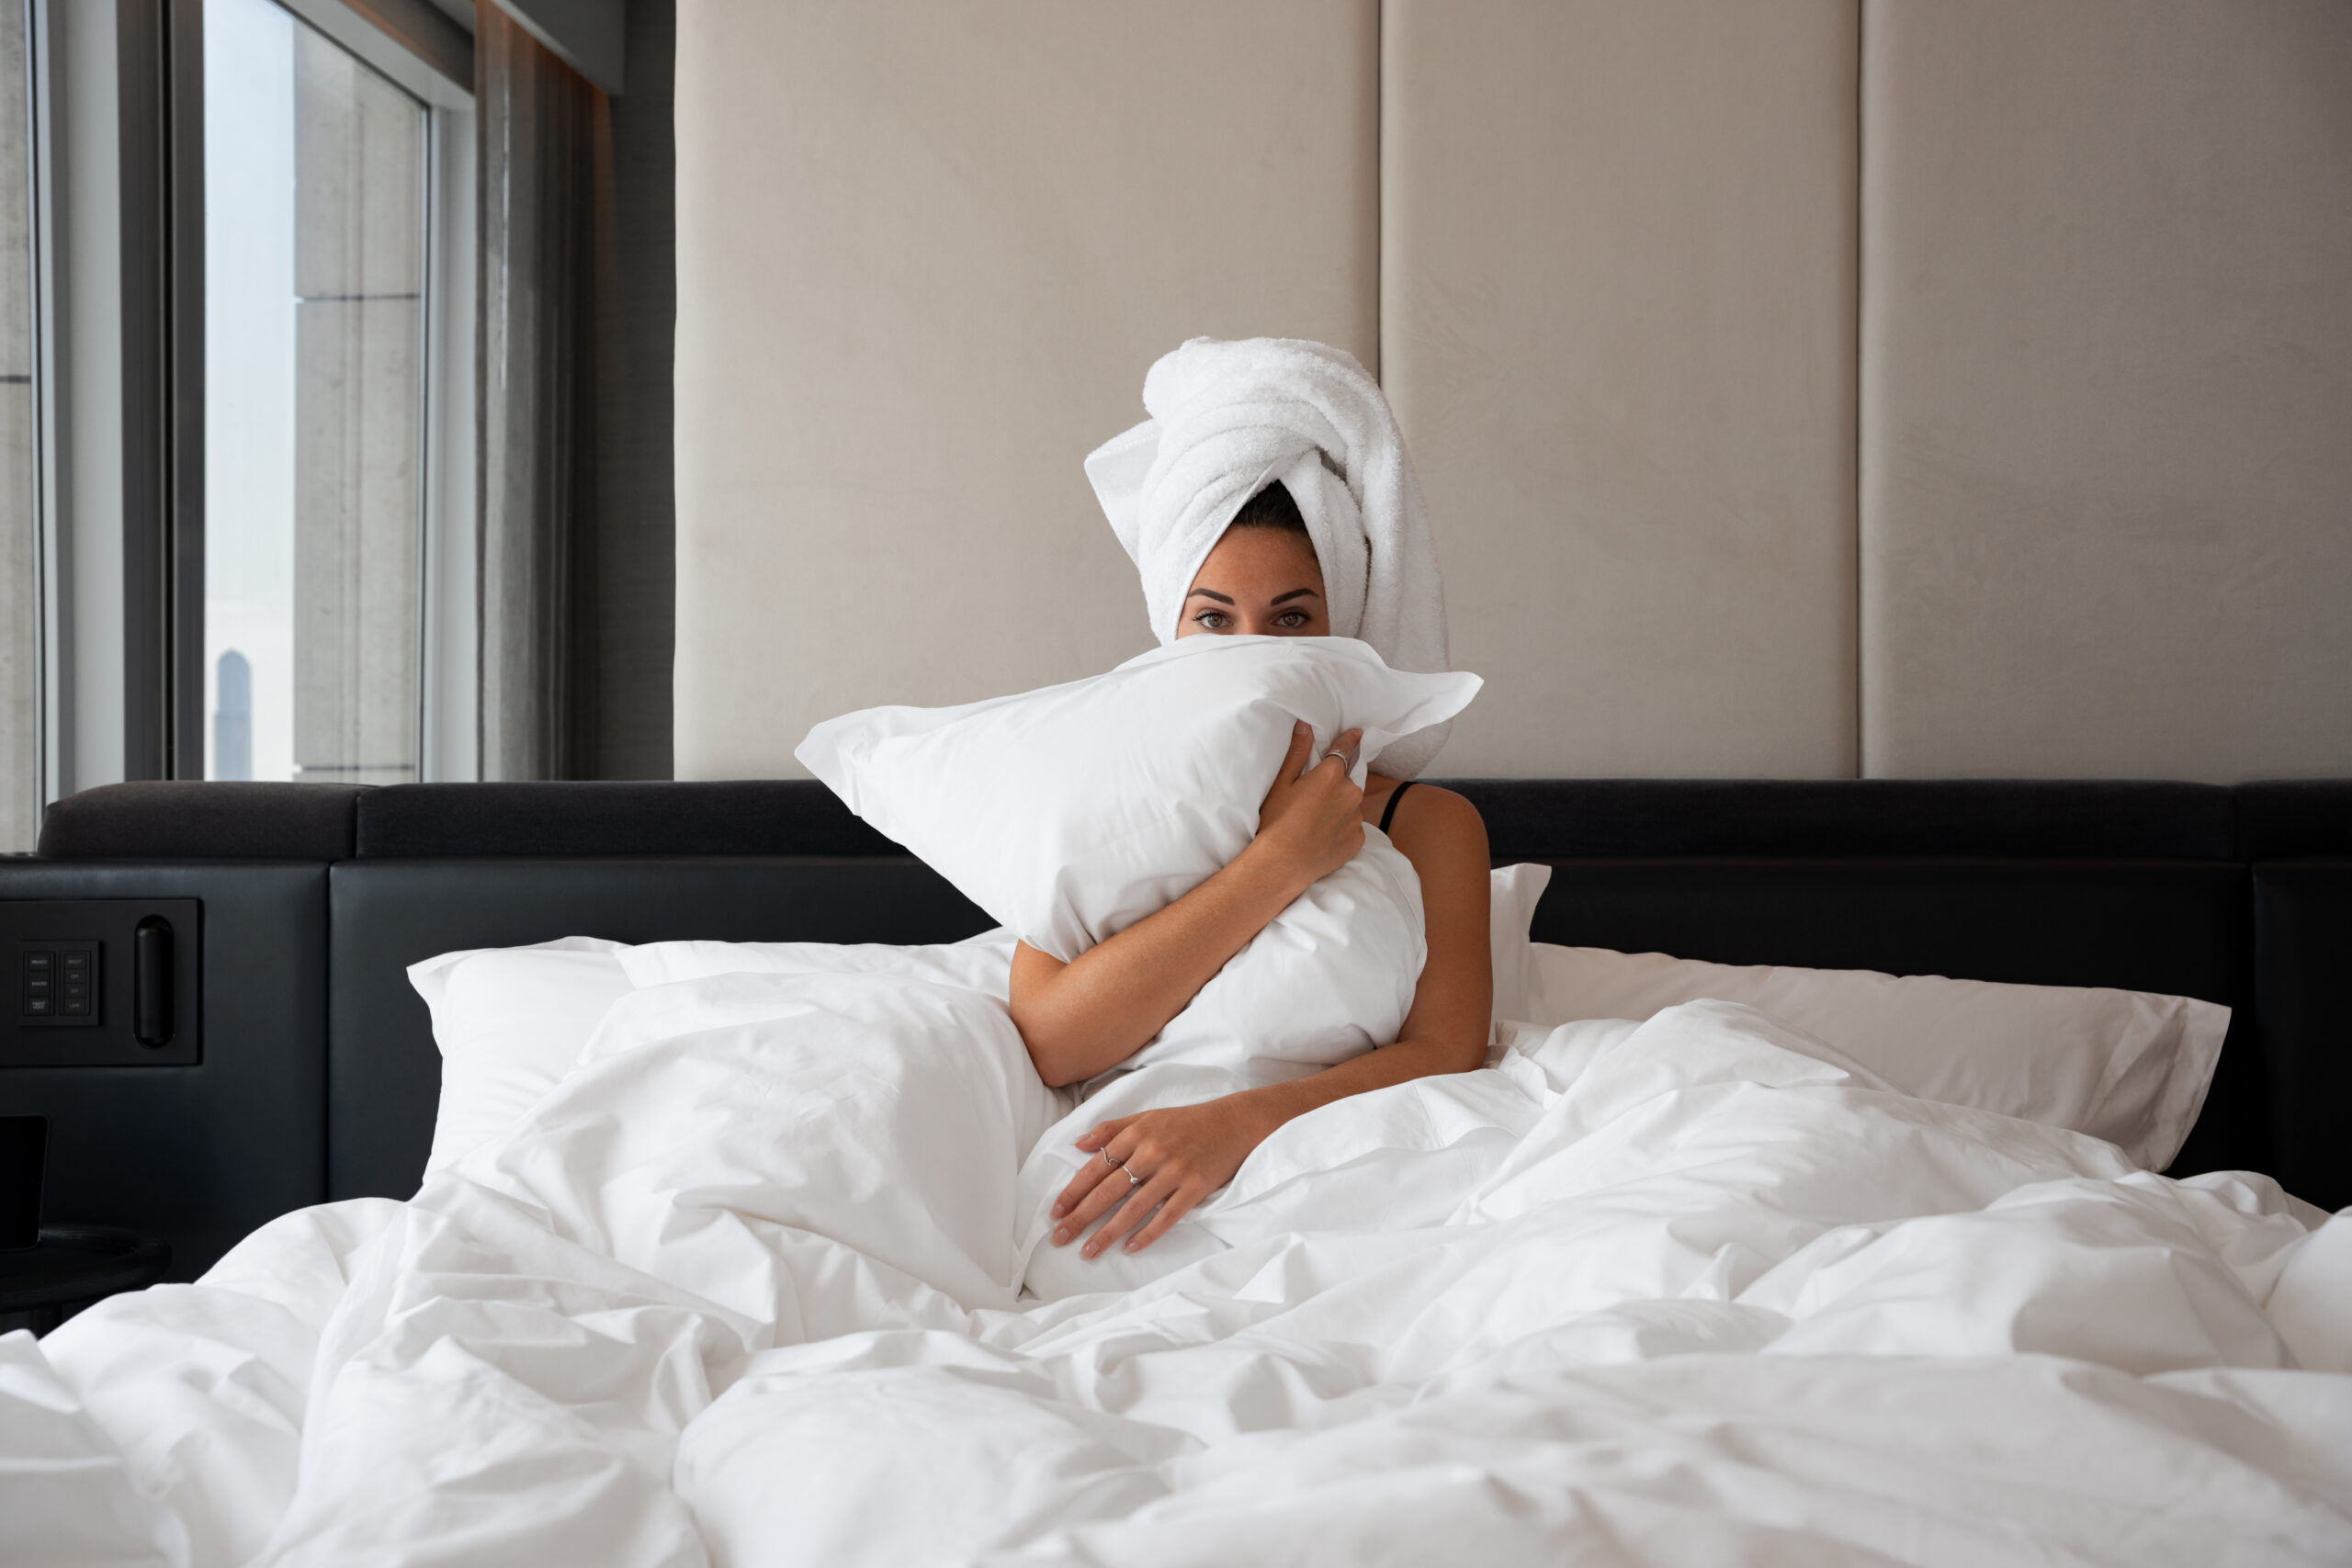 Woman in hotel bed holding a pillow with her arms and a towel in her hair